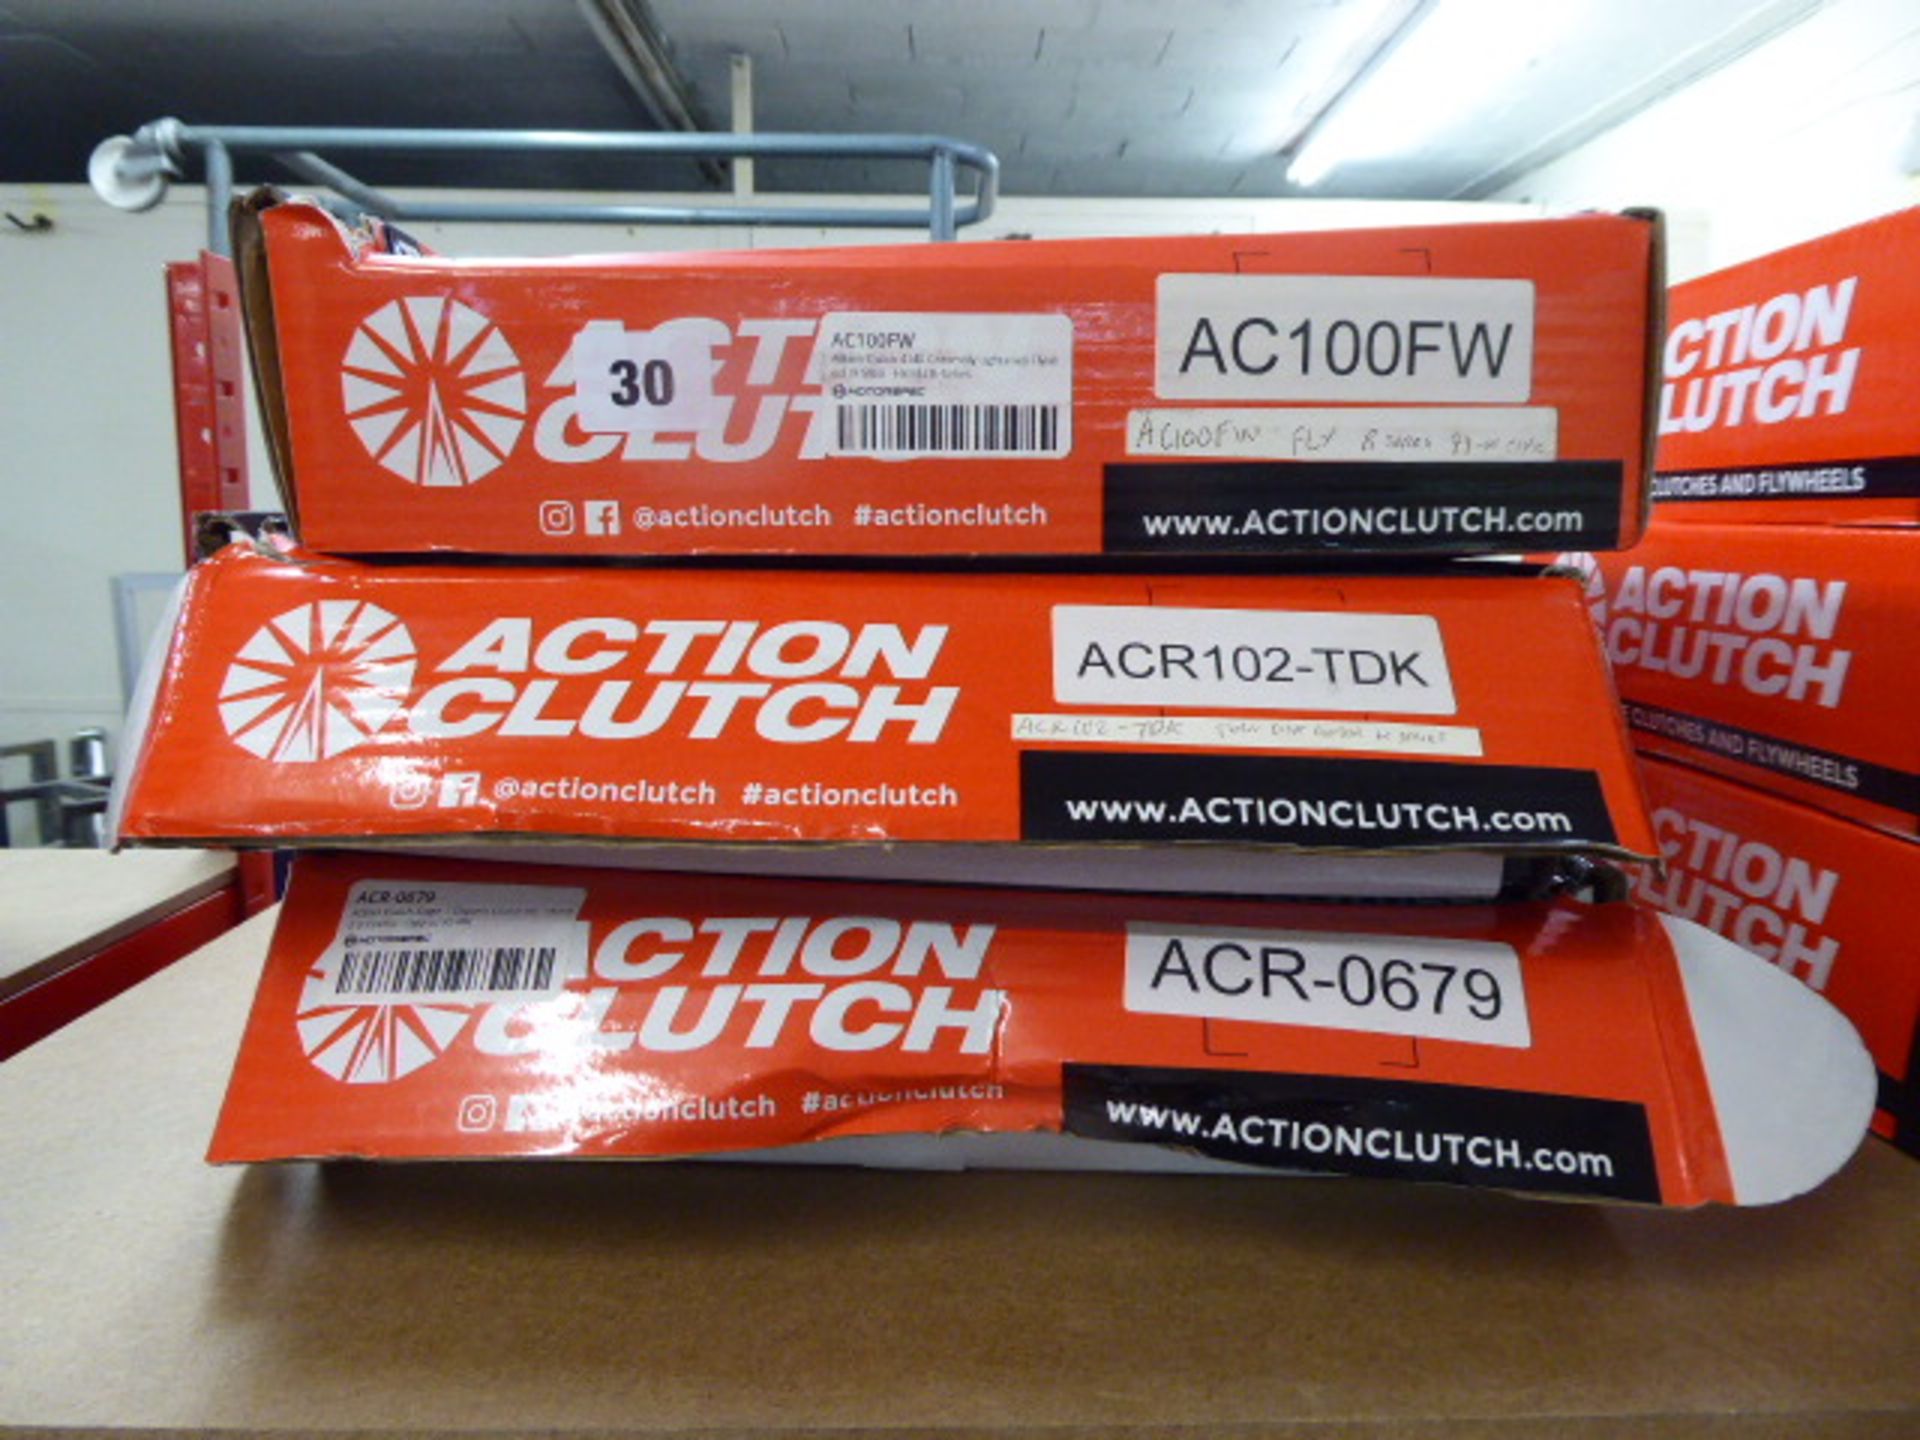 Three assorted Action Clutch fly wheels and clutch kits